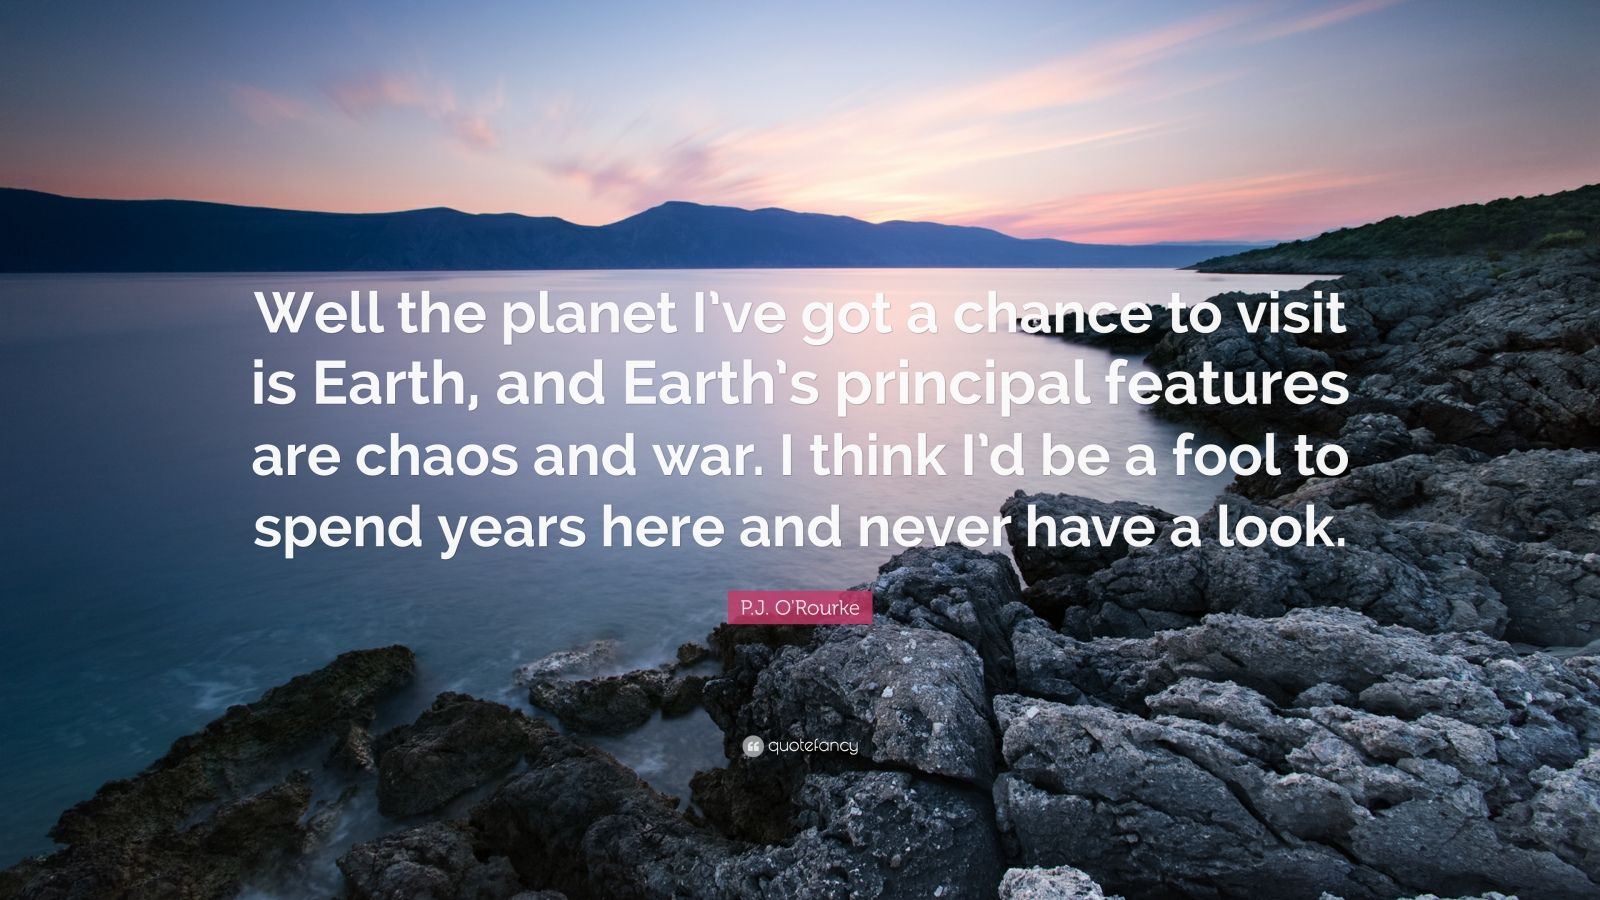 P J O Rourke Quote Well The Planet I Ve Got A Chance To Visit Is Earth And Earth S Principal Features Are Chaos And War I Think I D Be A